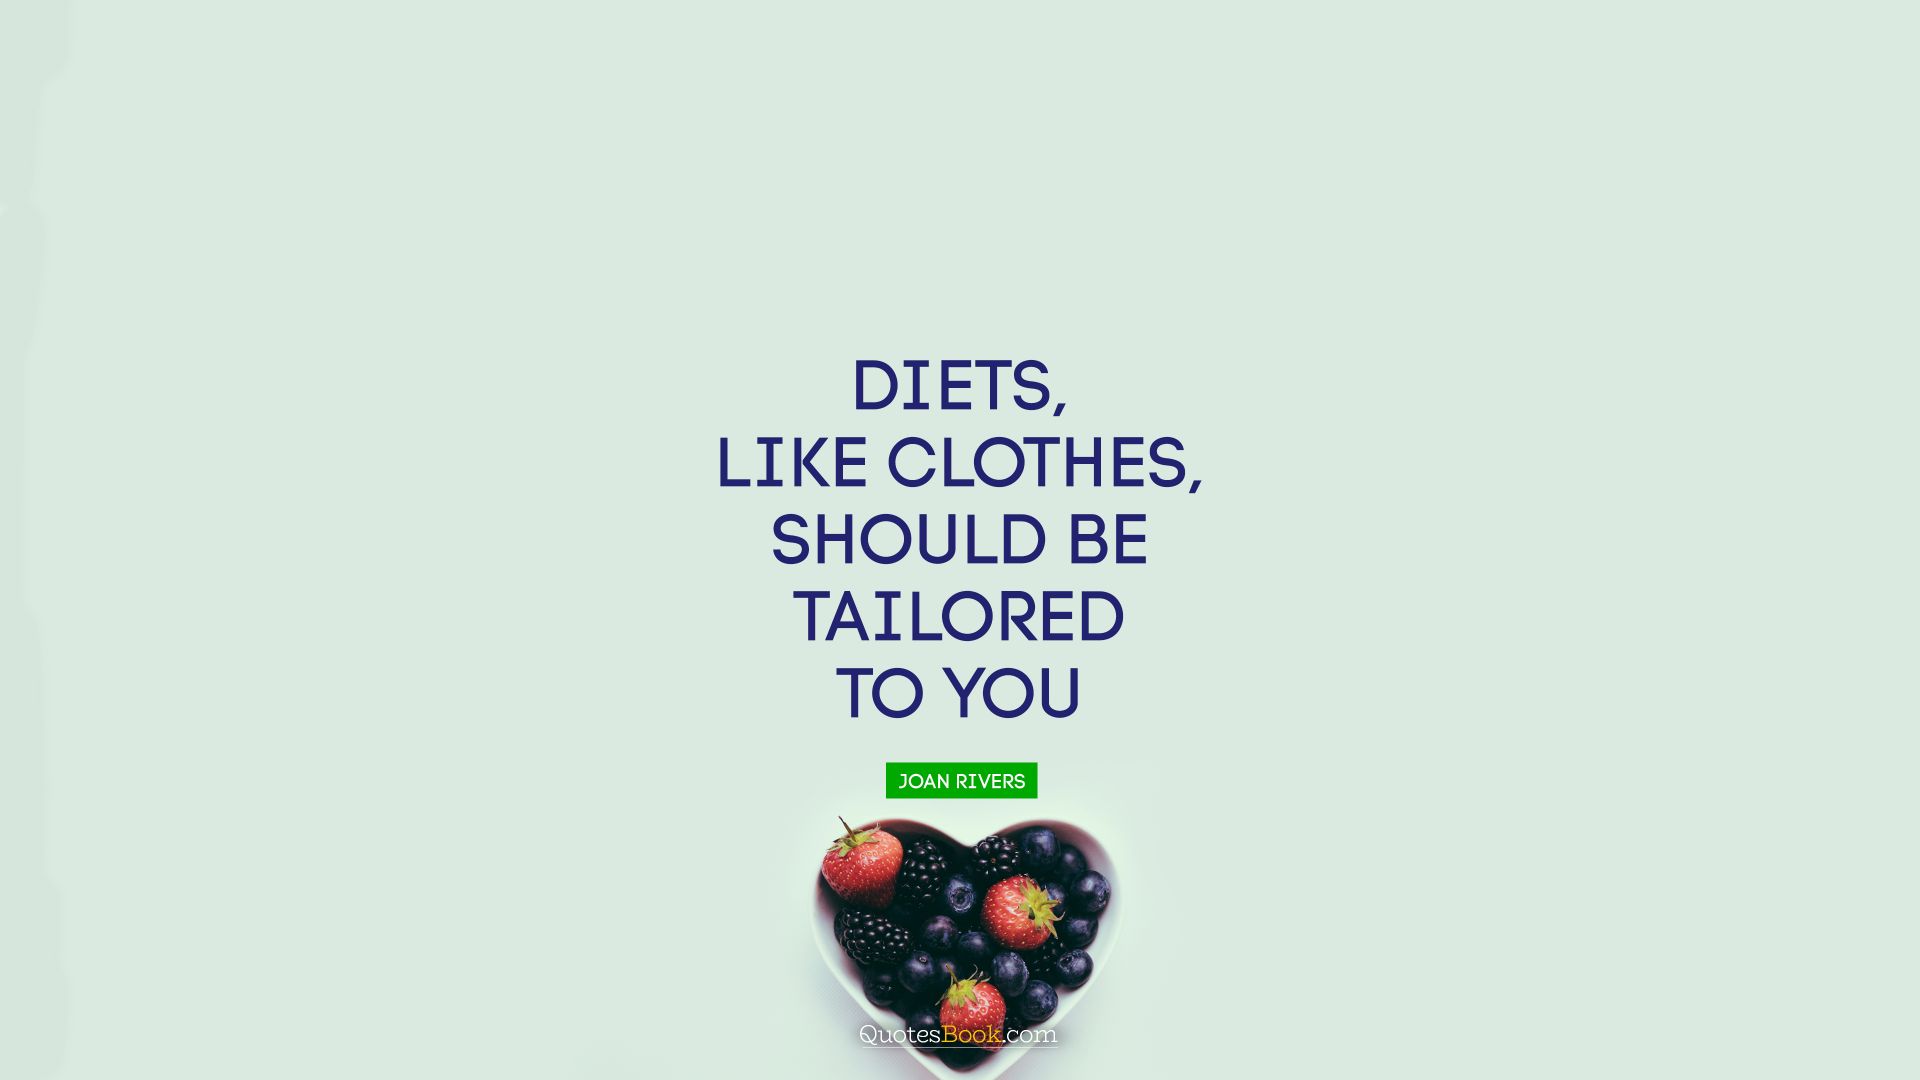 Diets, like clothes, should be tailored to you. - Quote by Joan Rivers